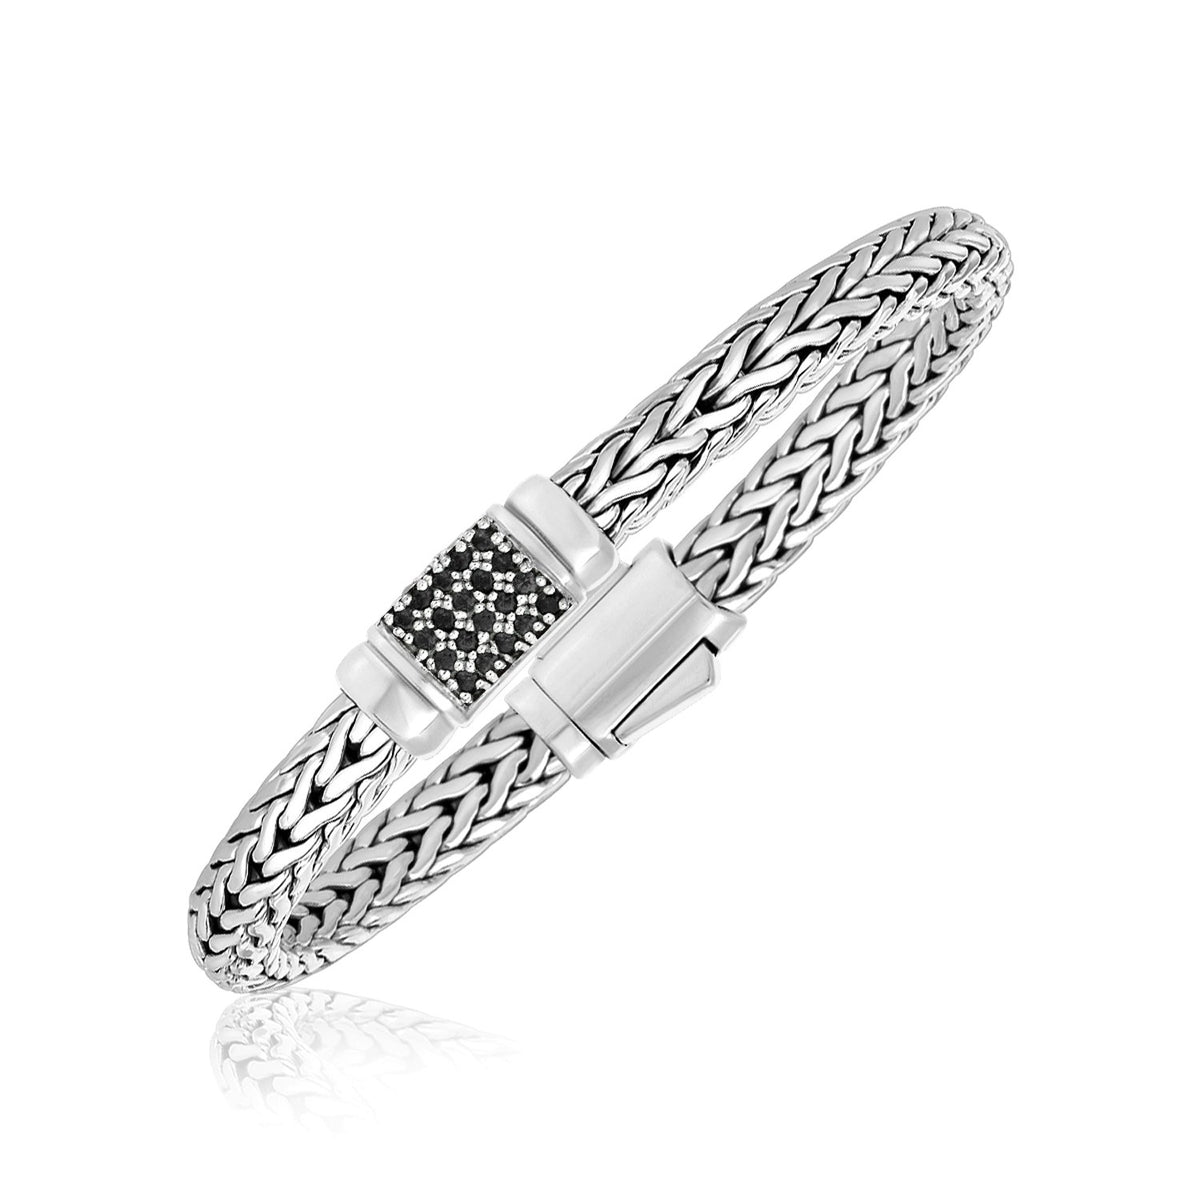 Weave Style Bracelet with Black Sapphire Accents - Sterling Silver 7.10mm